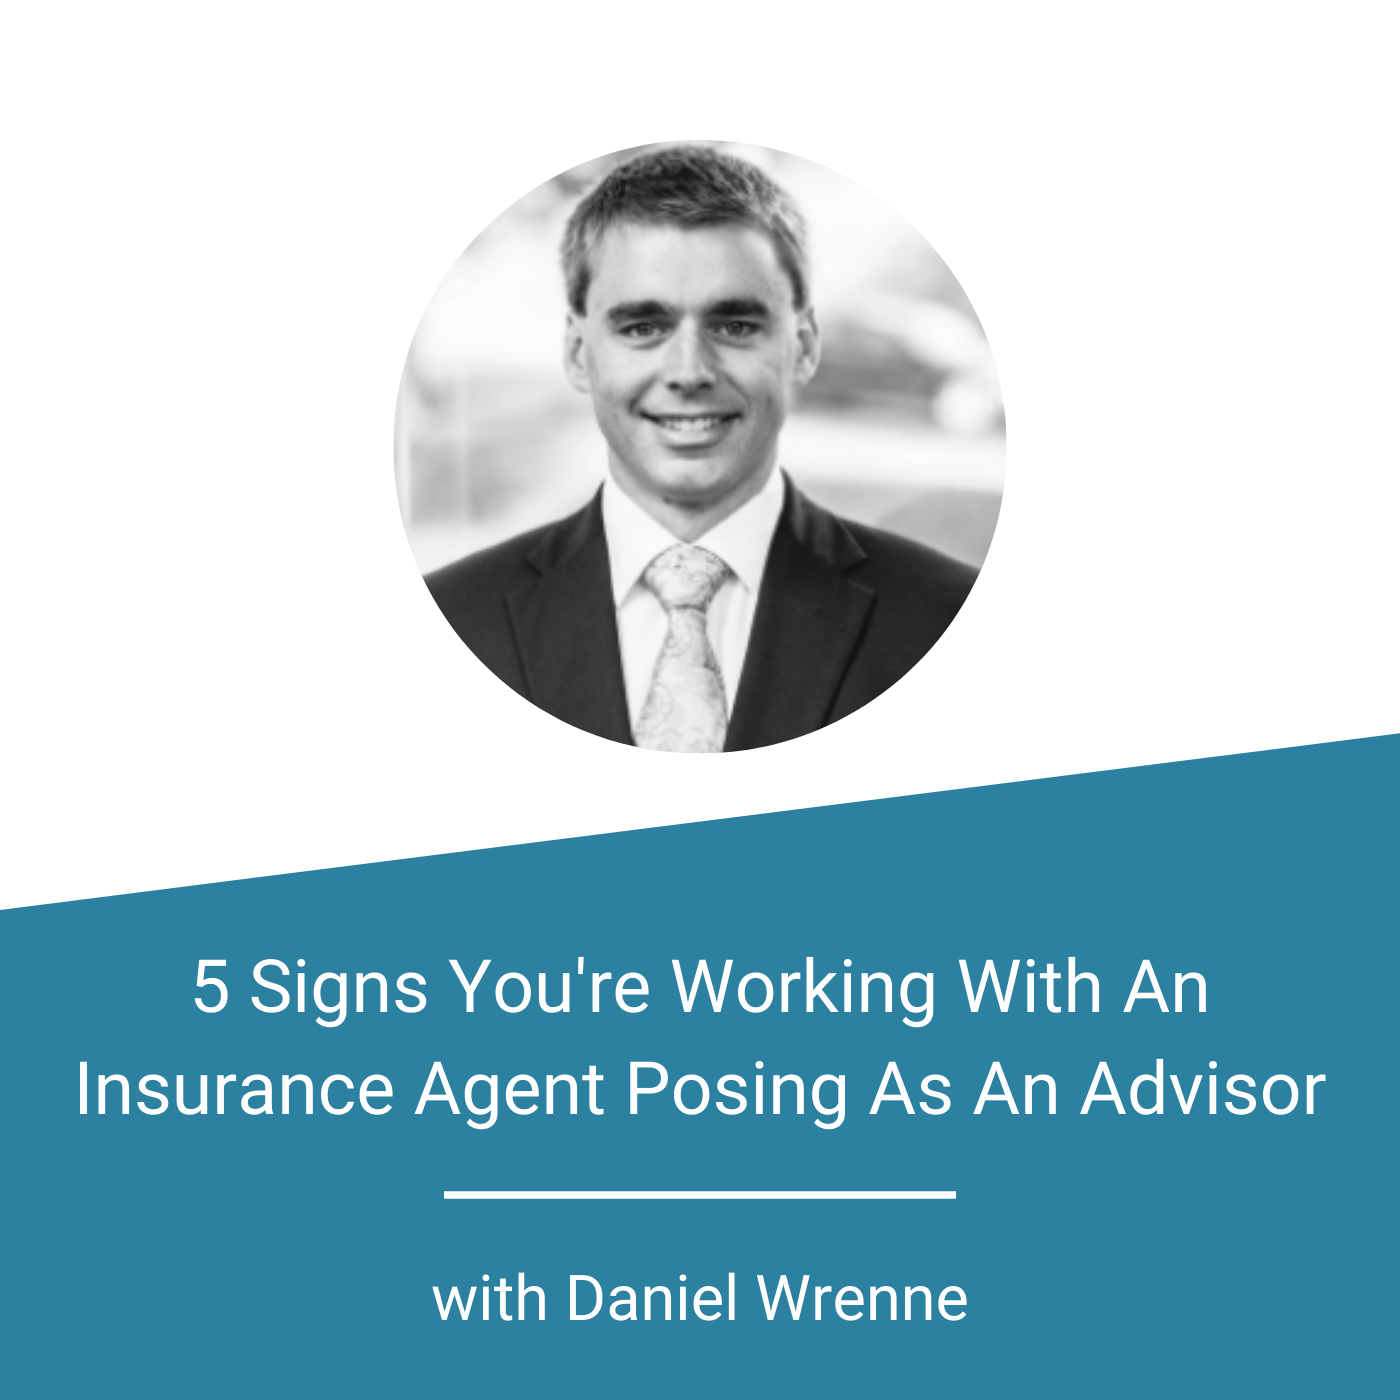 Featured Image - Posing as an Advisor